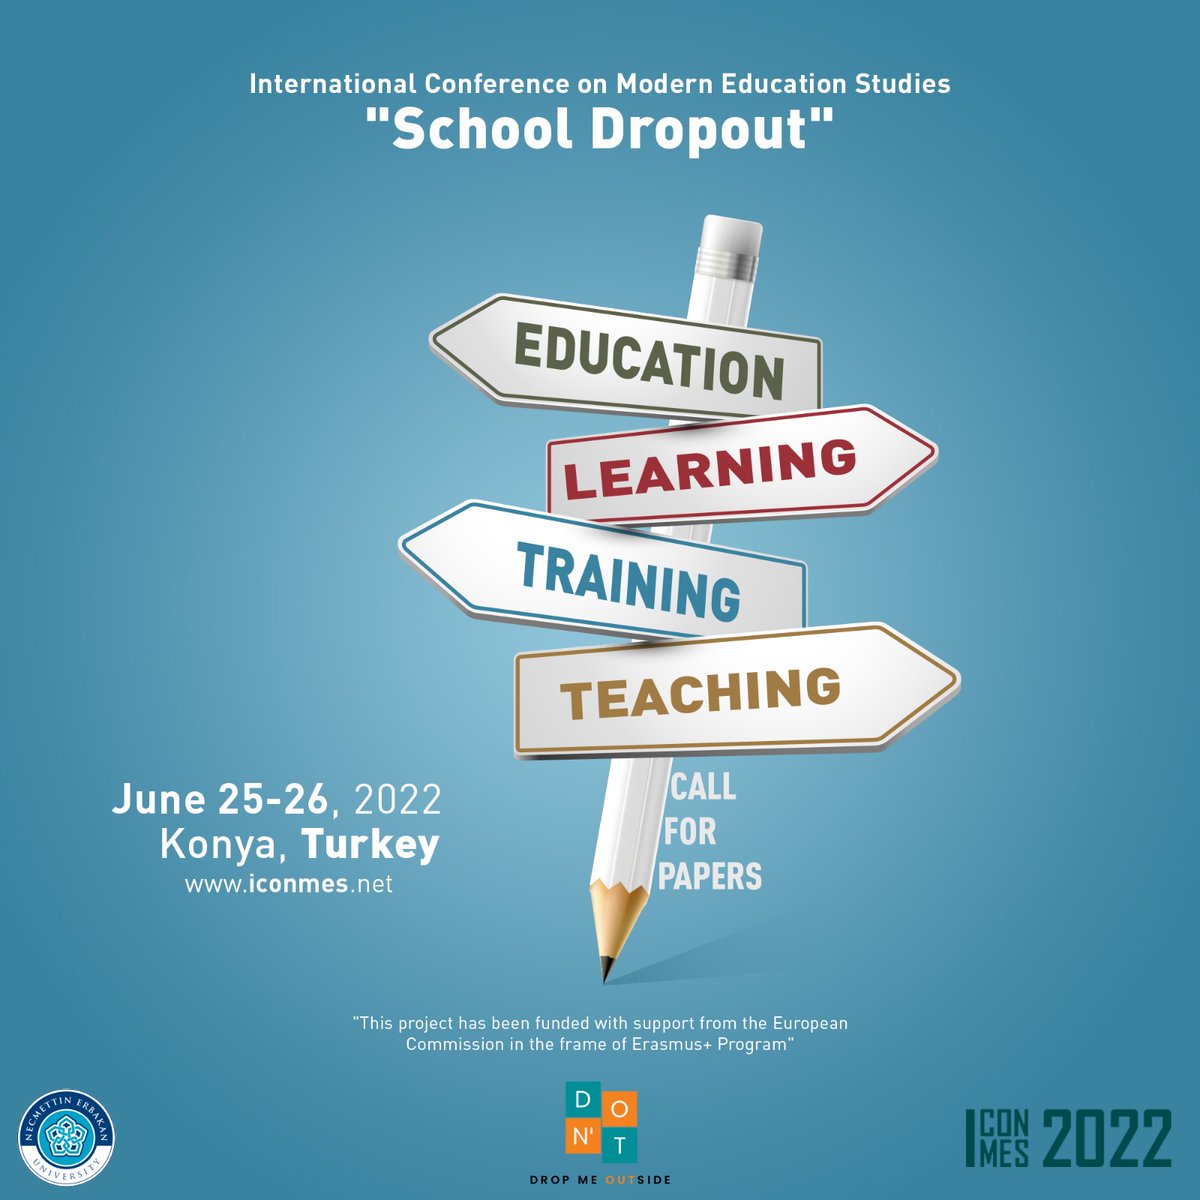 Conference on 'School Dropout' organized by Necmettin Erbakan University. Participation is free for the participants. The papers will be published in @ijonmes or @JesmaJournal or as a book chapter or proceeding. Here is the link for registration iconmes.net #dropout